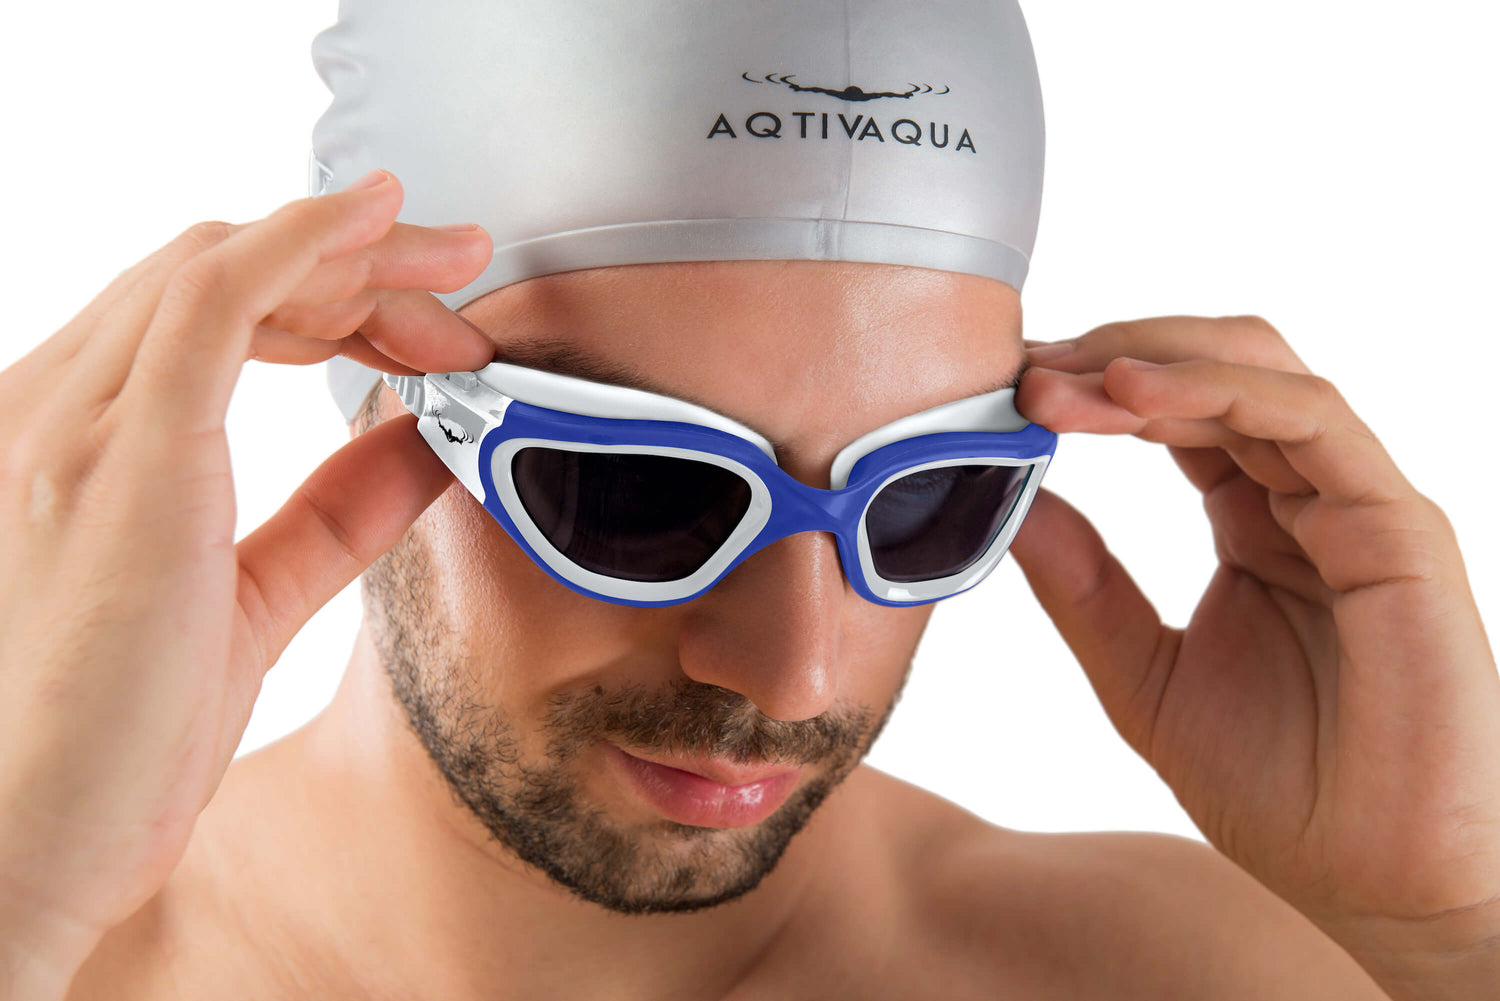 Swimmer wearing AQTIVAQUA goggles – experience ultimate comfort, clarity, and style during your aquatic pursuits